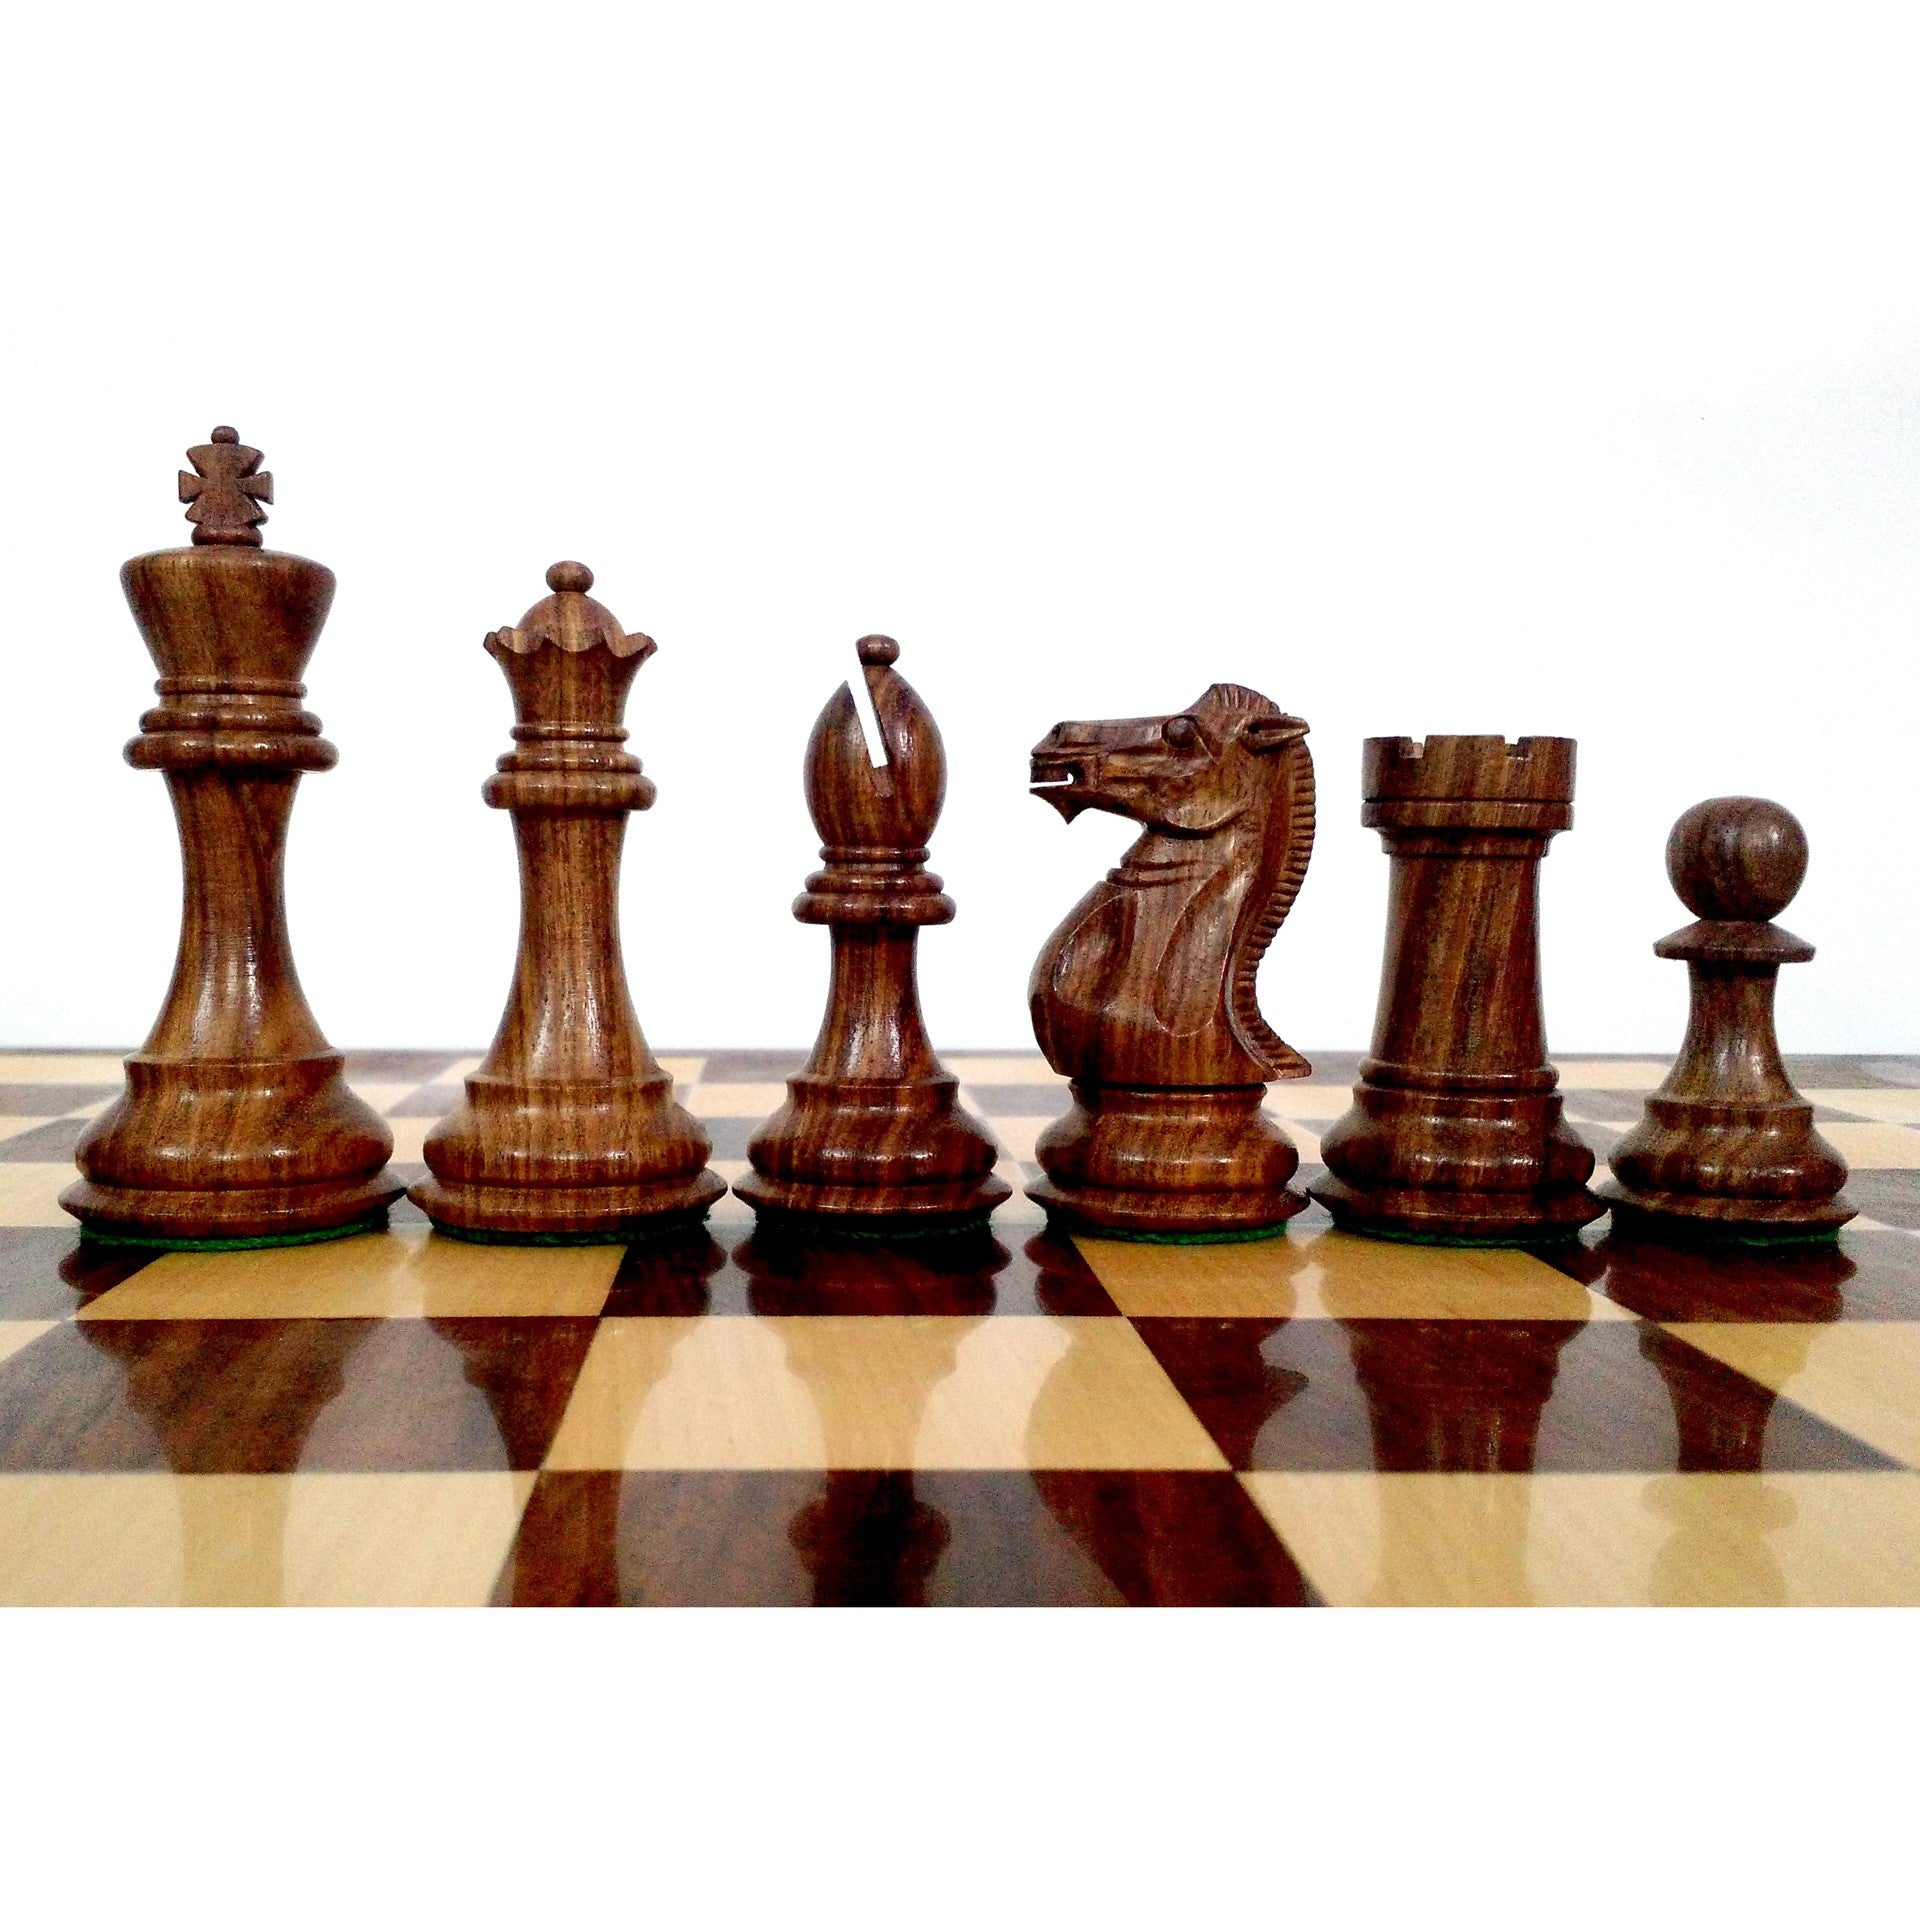 4.1" Pro Staunton Weighted Wooden Chess Pieces Only Set - Sheesham wood - 4 queens